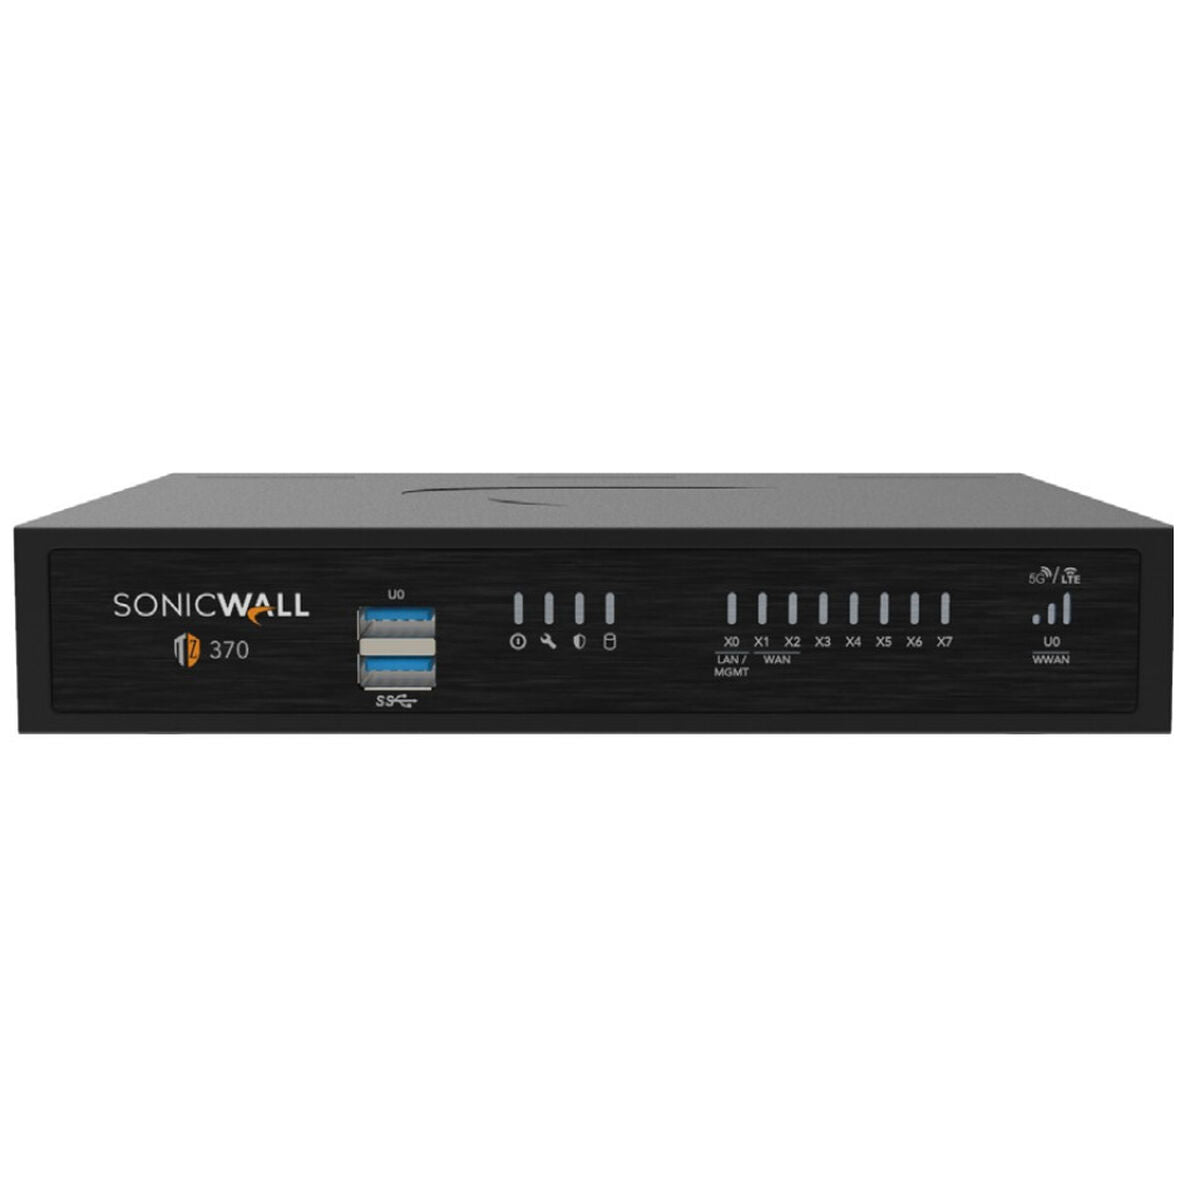 Adaptor SonicWall 02-SSC-6822, SonicWall, Computing, Accessories, adaptor-sonicwall-02-ssc-6822, Brand_SonicWall, category-reference-2609, category-reference-2617, category-reference-2621, Condition_NEW, networks/wiring, Price_+ 1000, telephones & tablets, Teleworking, RiotNook